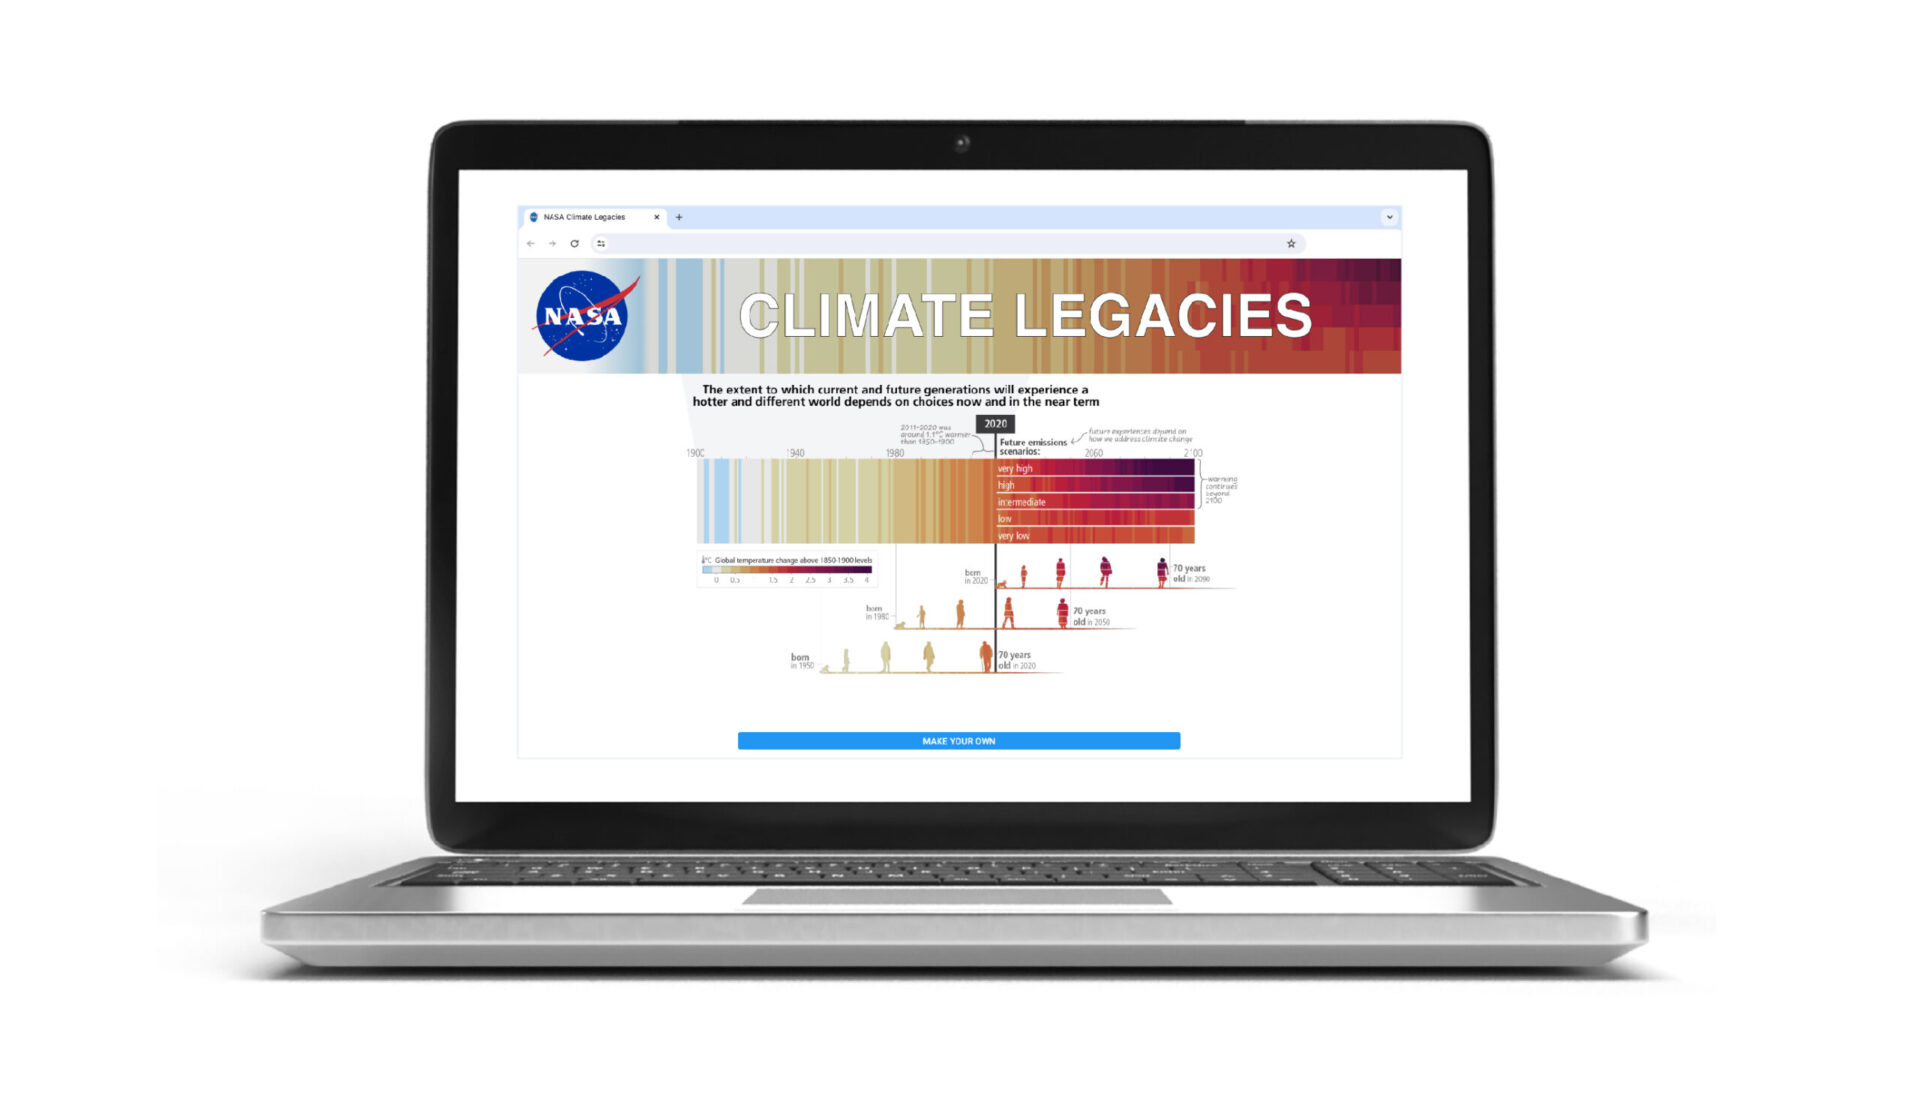 NASA climate legacies interactive tool to create climate generations